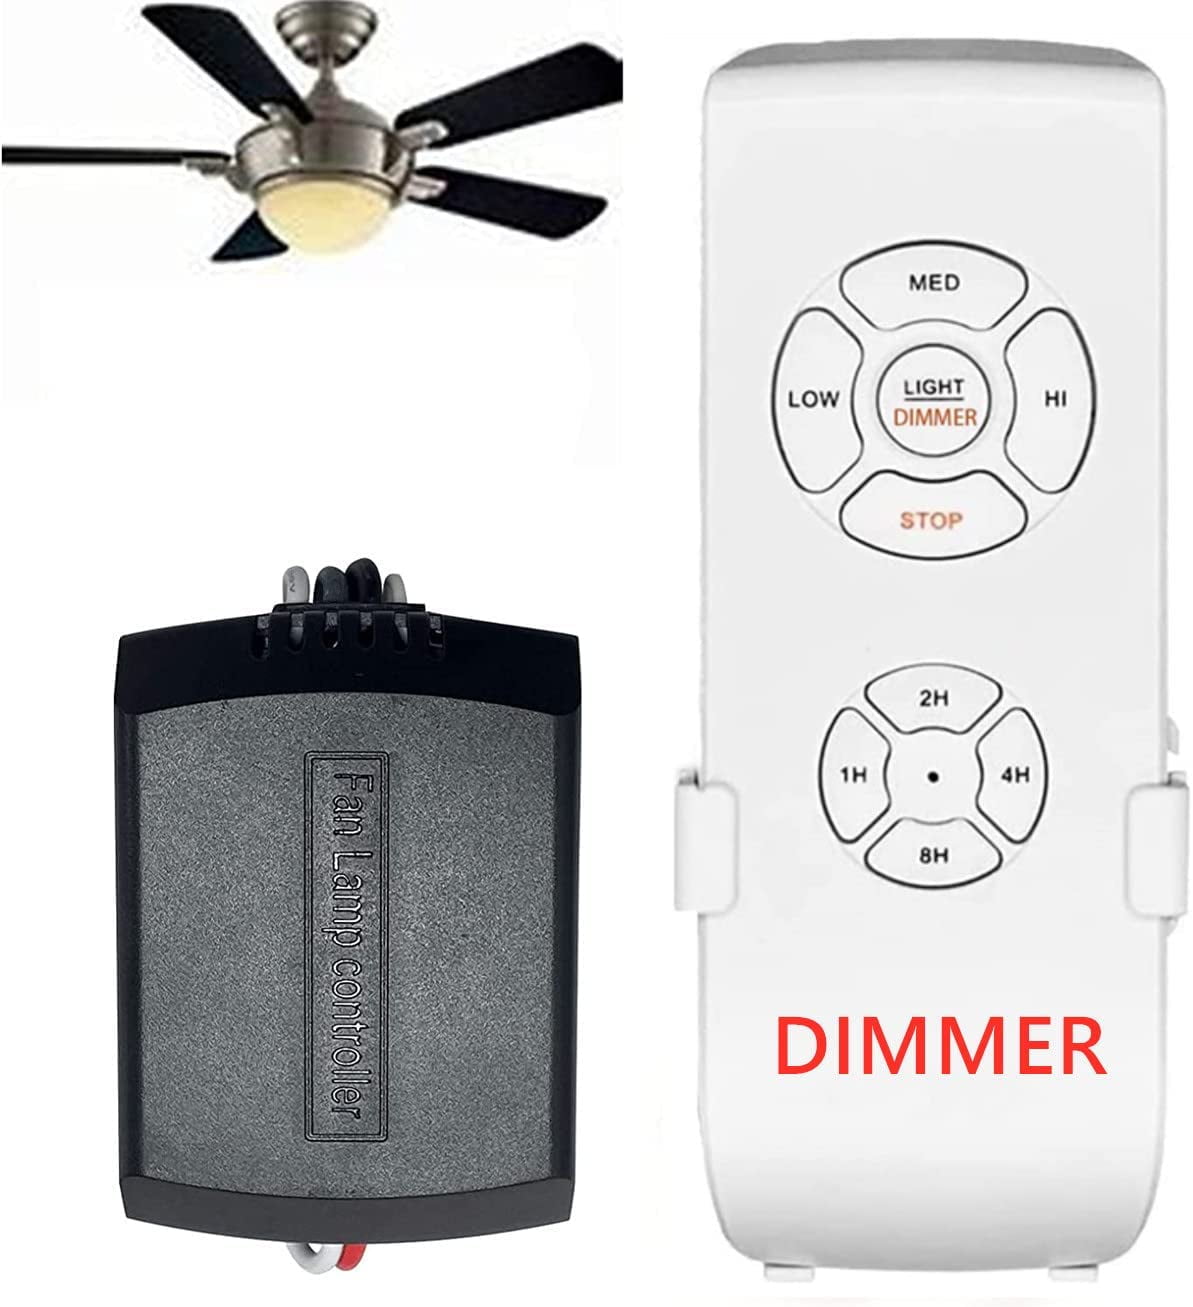 Dreamhall ON/OFF 220V Wireless Light RF Remote Control Switch and Receiver  Kit for Ceiling Lights, Fans, Lamps, No Wiring 1 Way